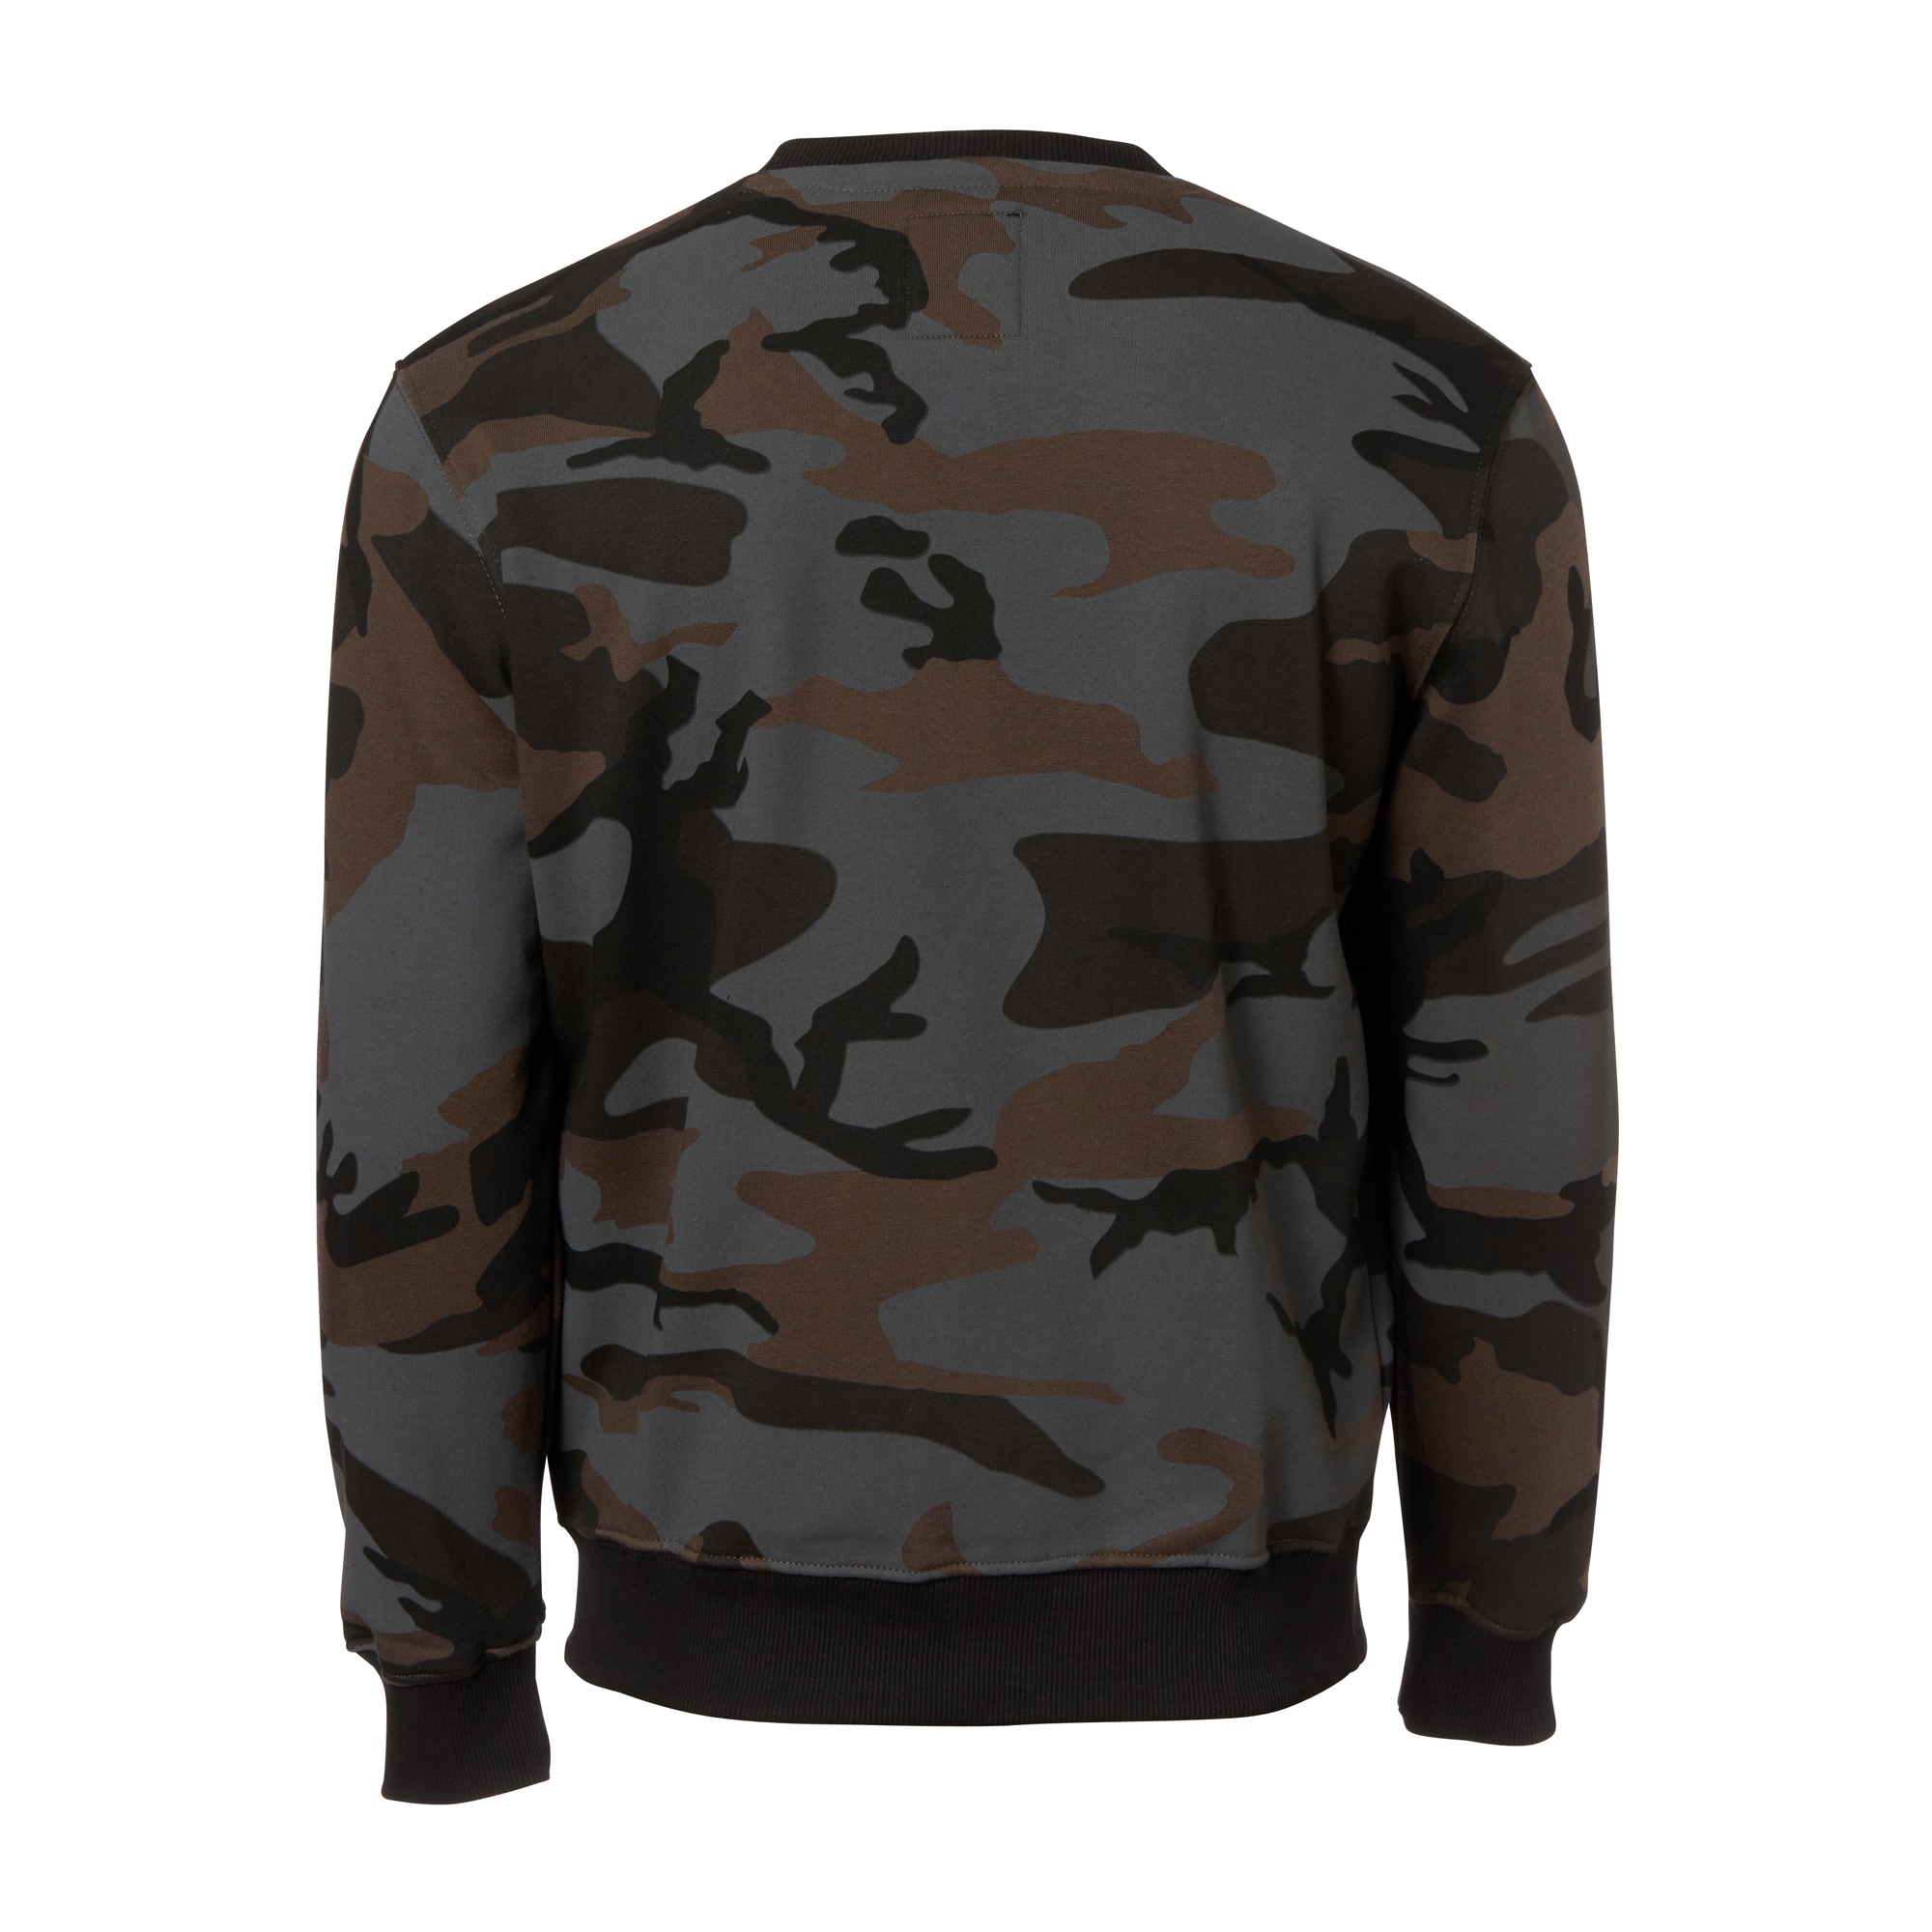 Camo Pullover Sweater Alpha black Basic Purchase the Industries